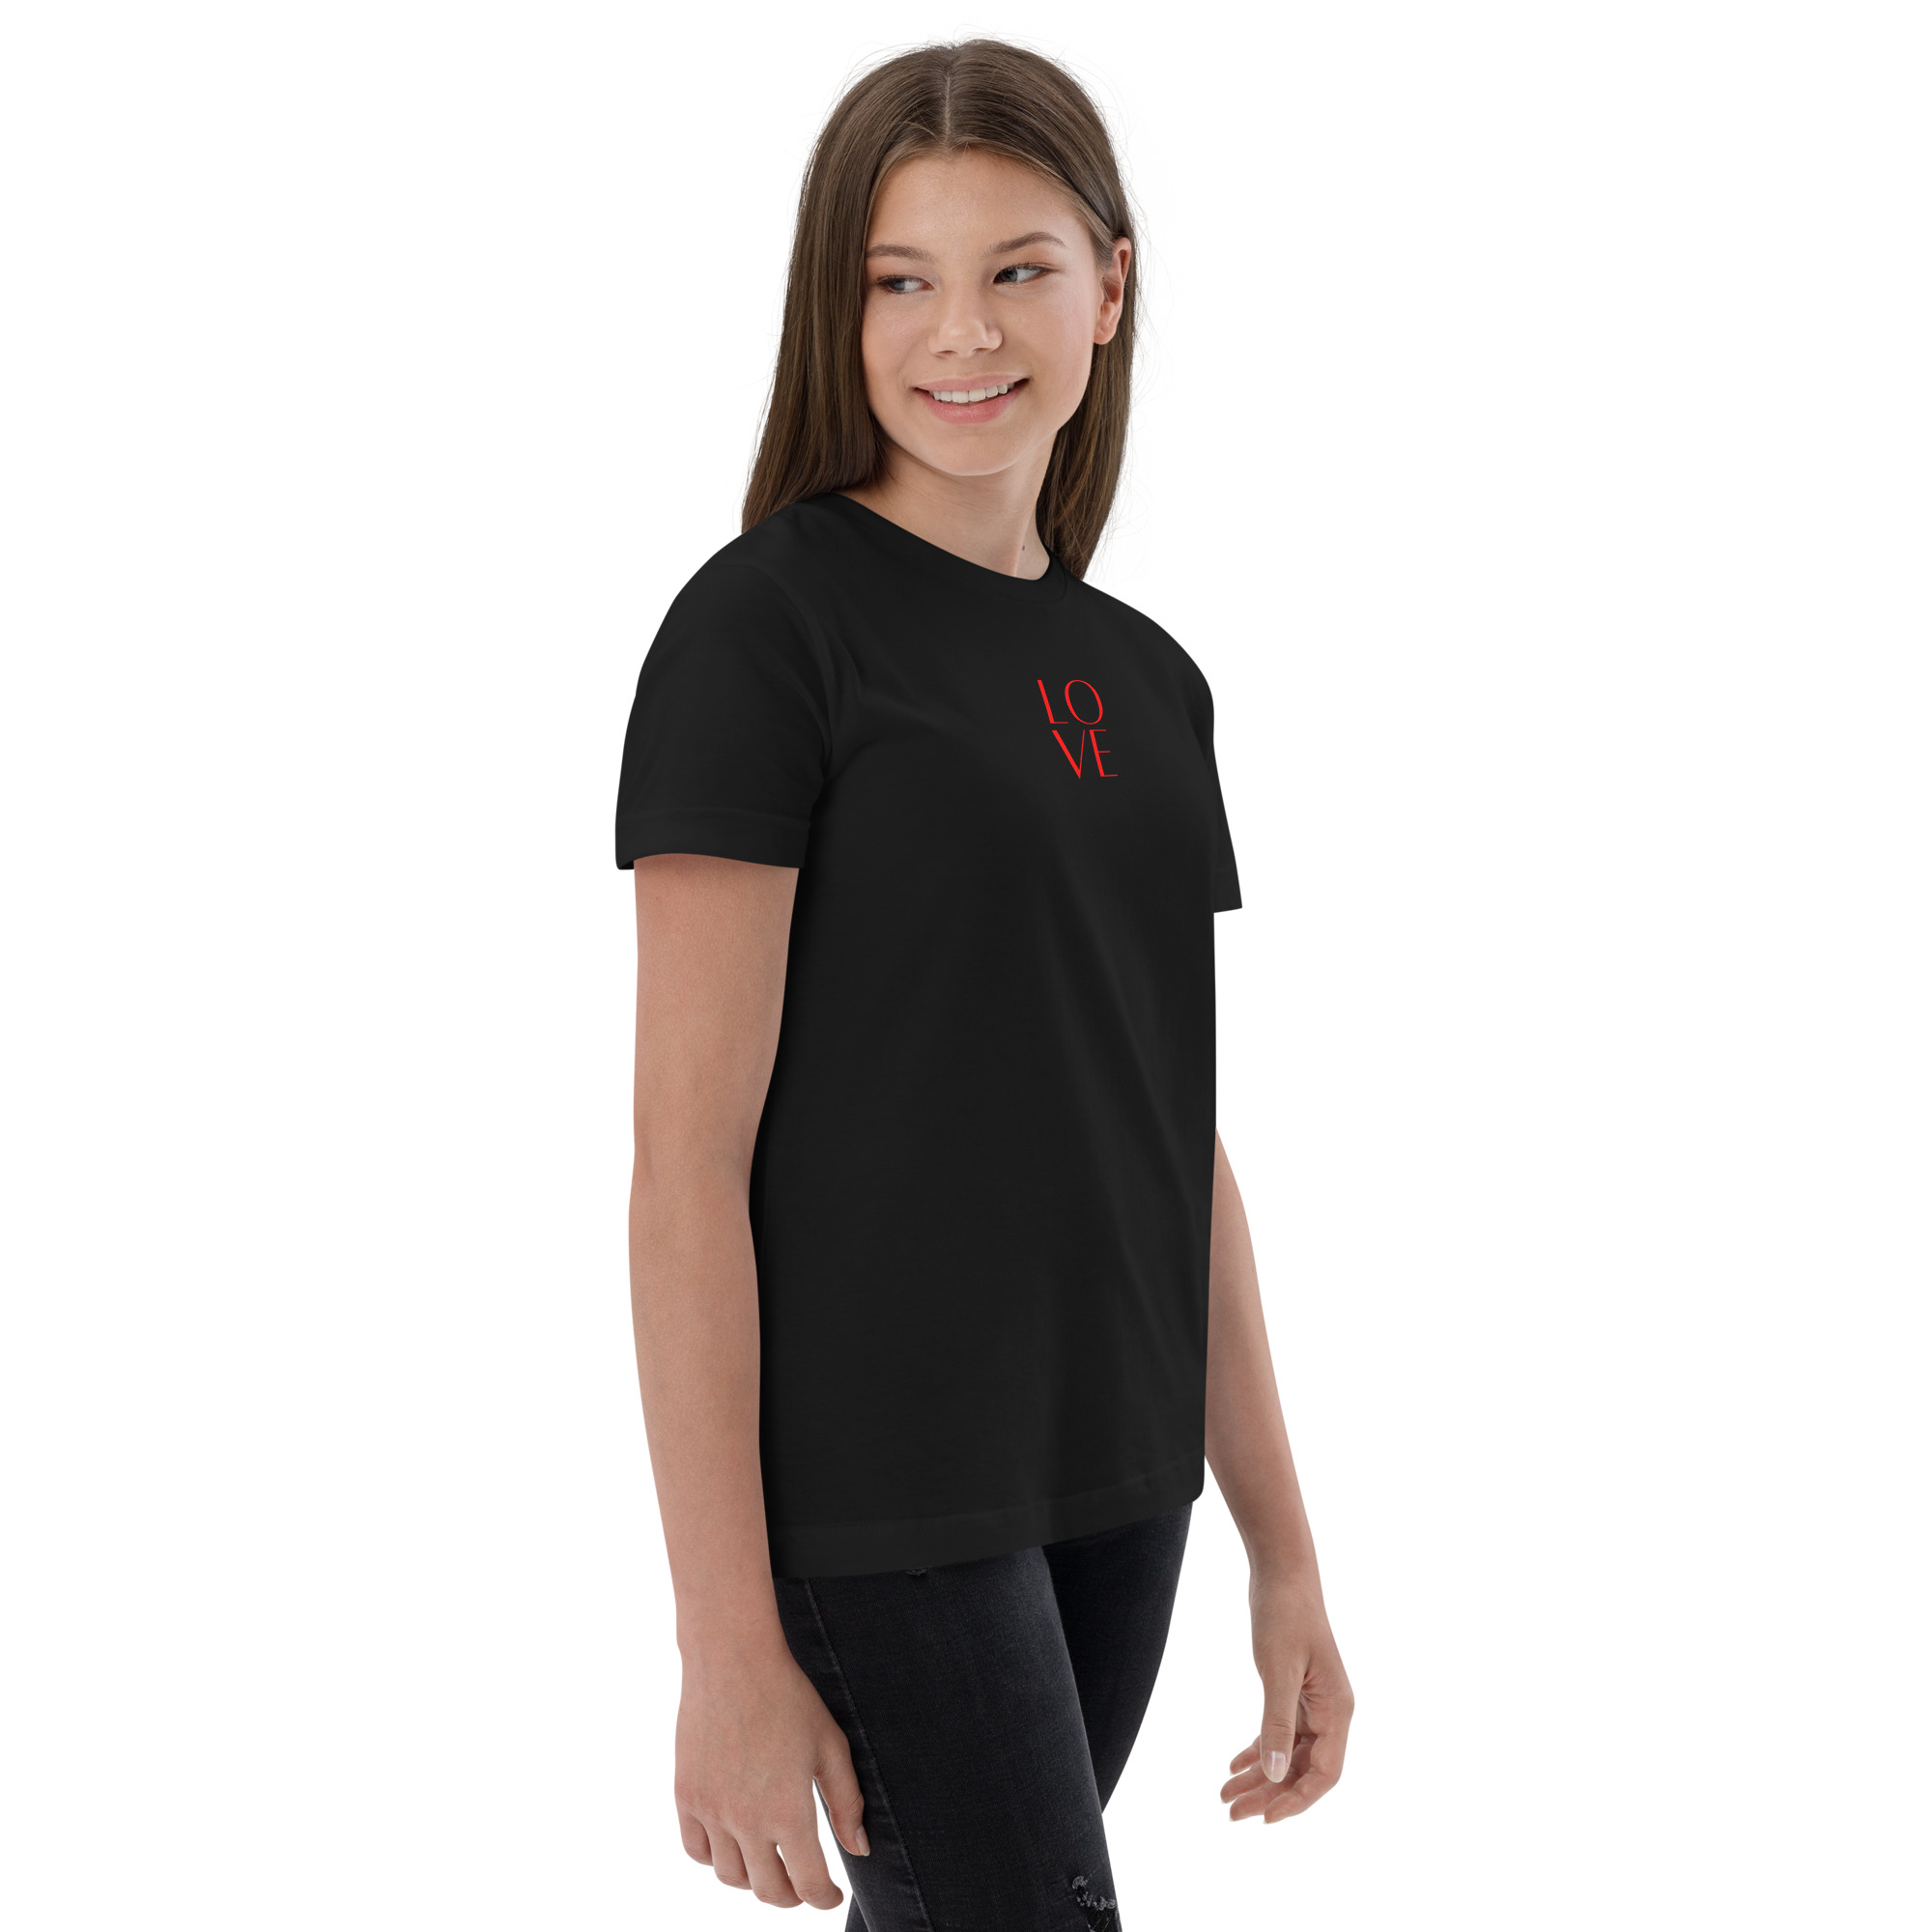 youth-jersey-t-shirt-black-right-front-6384cb2a1d3f0.jpg